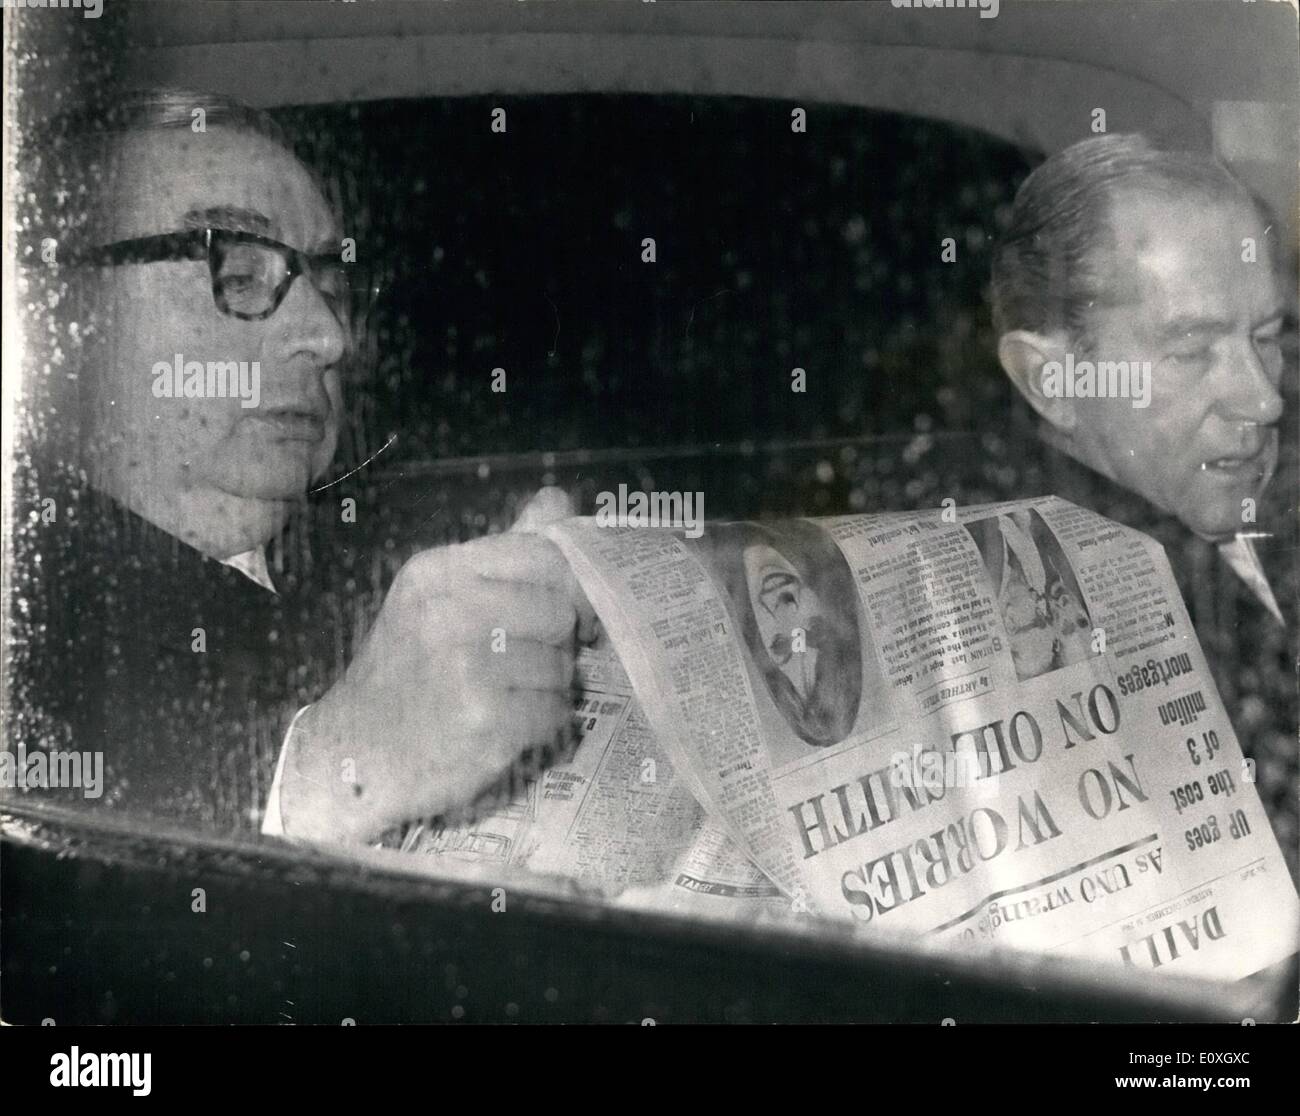 Dec. 12, 1966 - Mr. George Brown home from America: Mr. George Brown the foreign Secretary arrived back this morning at London Airport from he visit to the U.N. in which he make a speach on the Rhodesia Crisis. Photo Shows Mr. Brown seen in his car after arriving back from the U.S. reads the now about no worries an oil-as said by Mr. Smith. Stock Photo